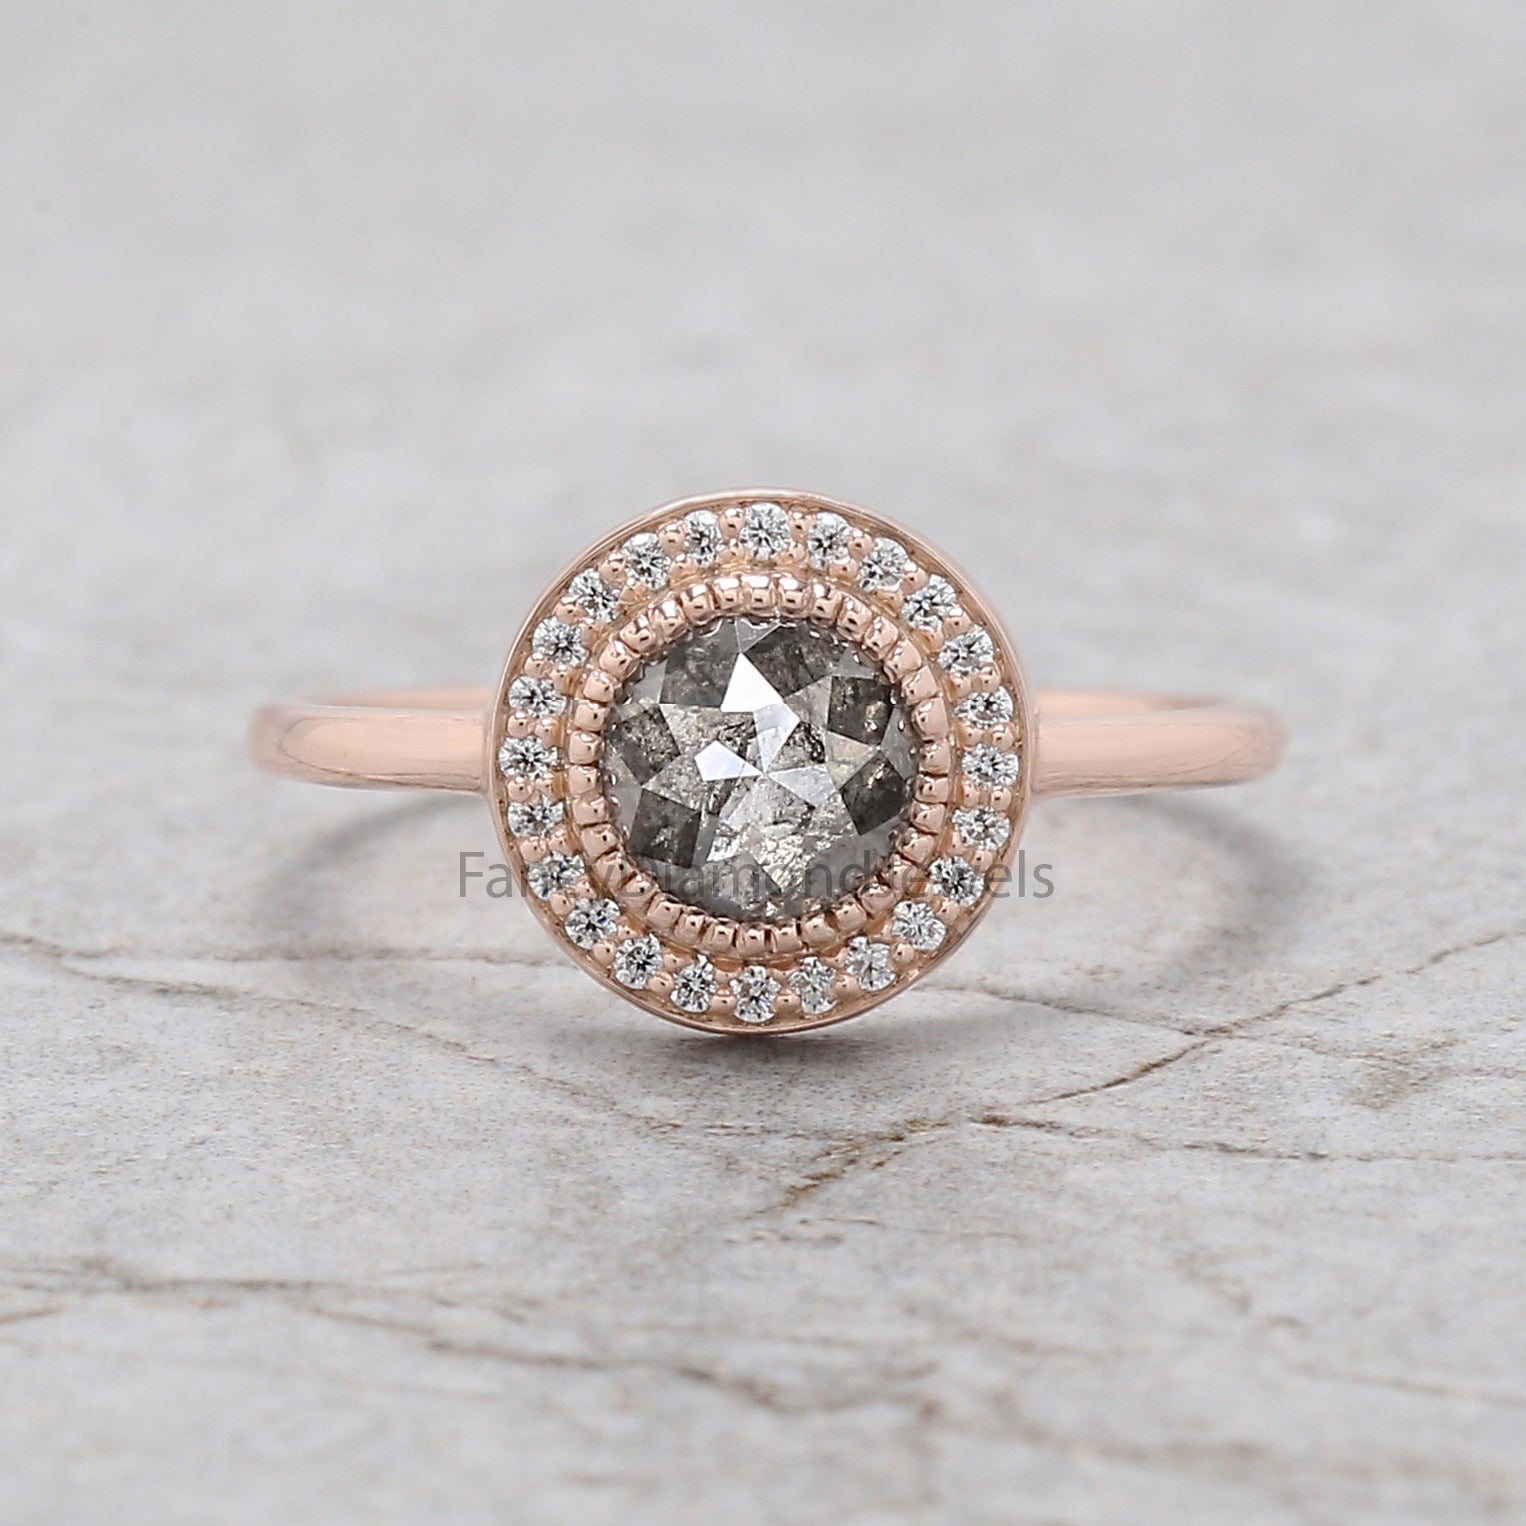 Round Rose Cut Salt And Pepper Diamond Ring 0.88 Ct 5.60 MM Round Shape Diamond Ring 14K Rose Gold Silver Engagement Ring Gift For Her QL2132